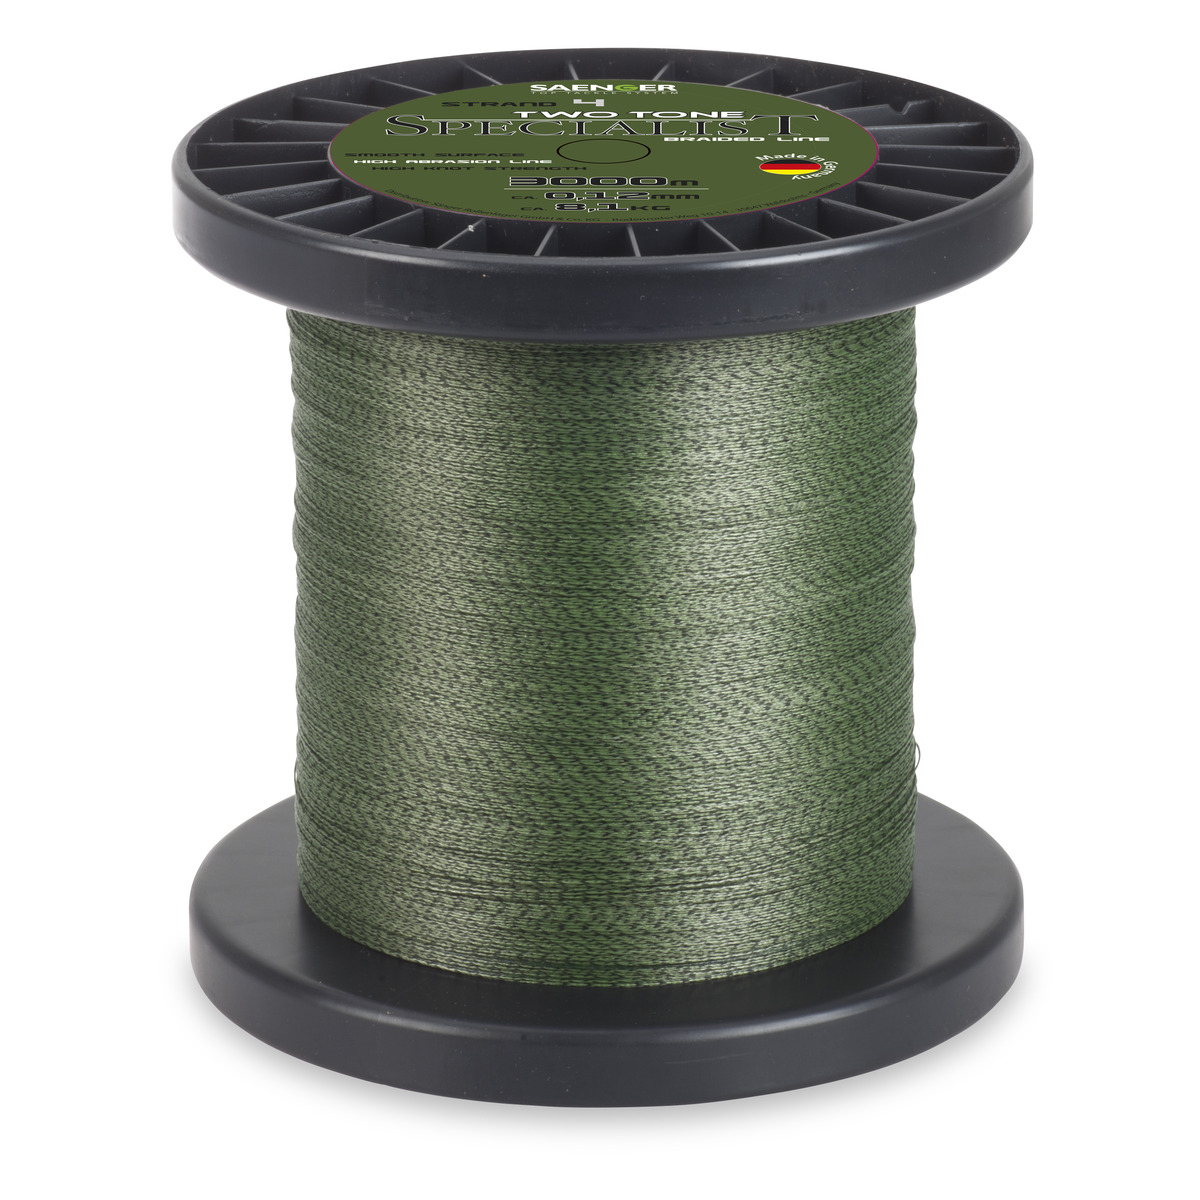 Saenger Specialist Two Tone Camou Braid - 0,30 mm - 25,5 kg 3000 m